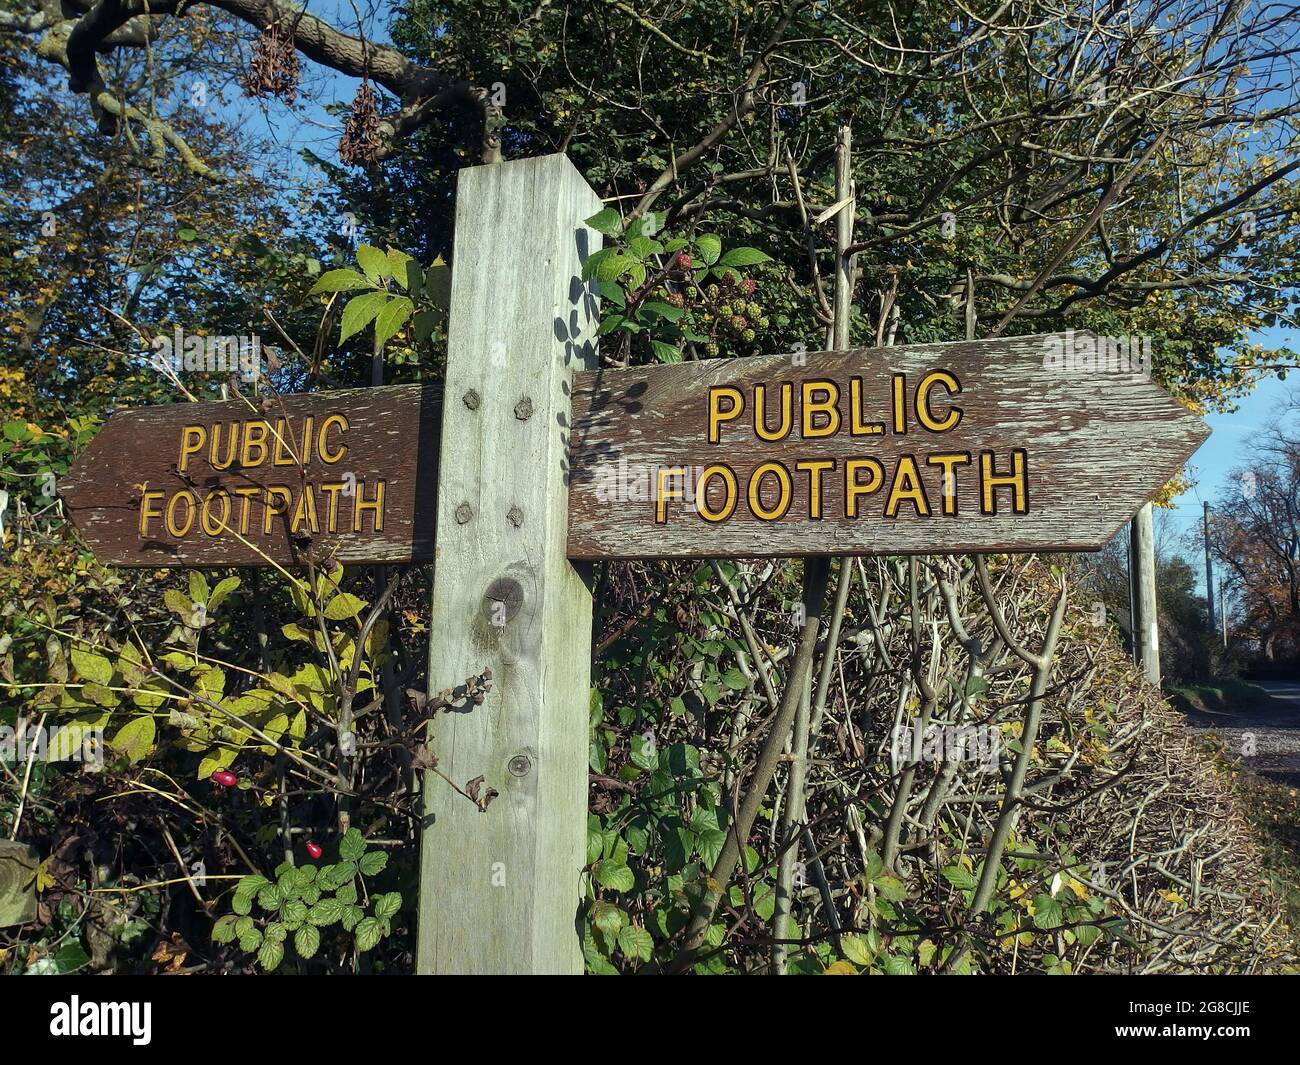 A Public Footpath post in the village of Berksell, Warwickshire. Stock Photo